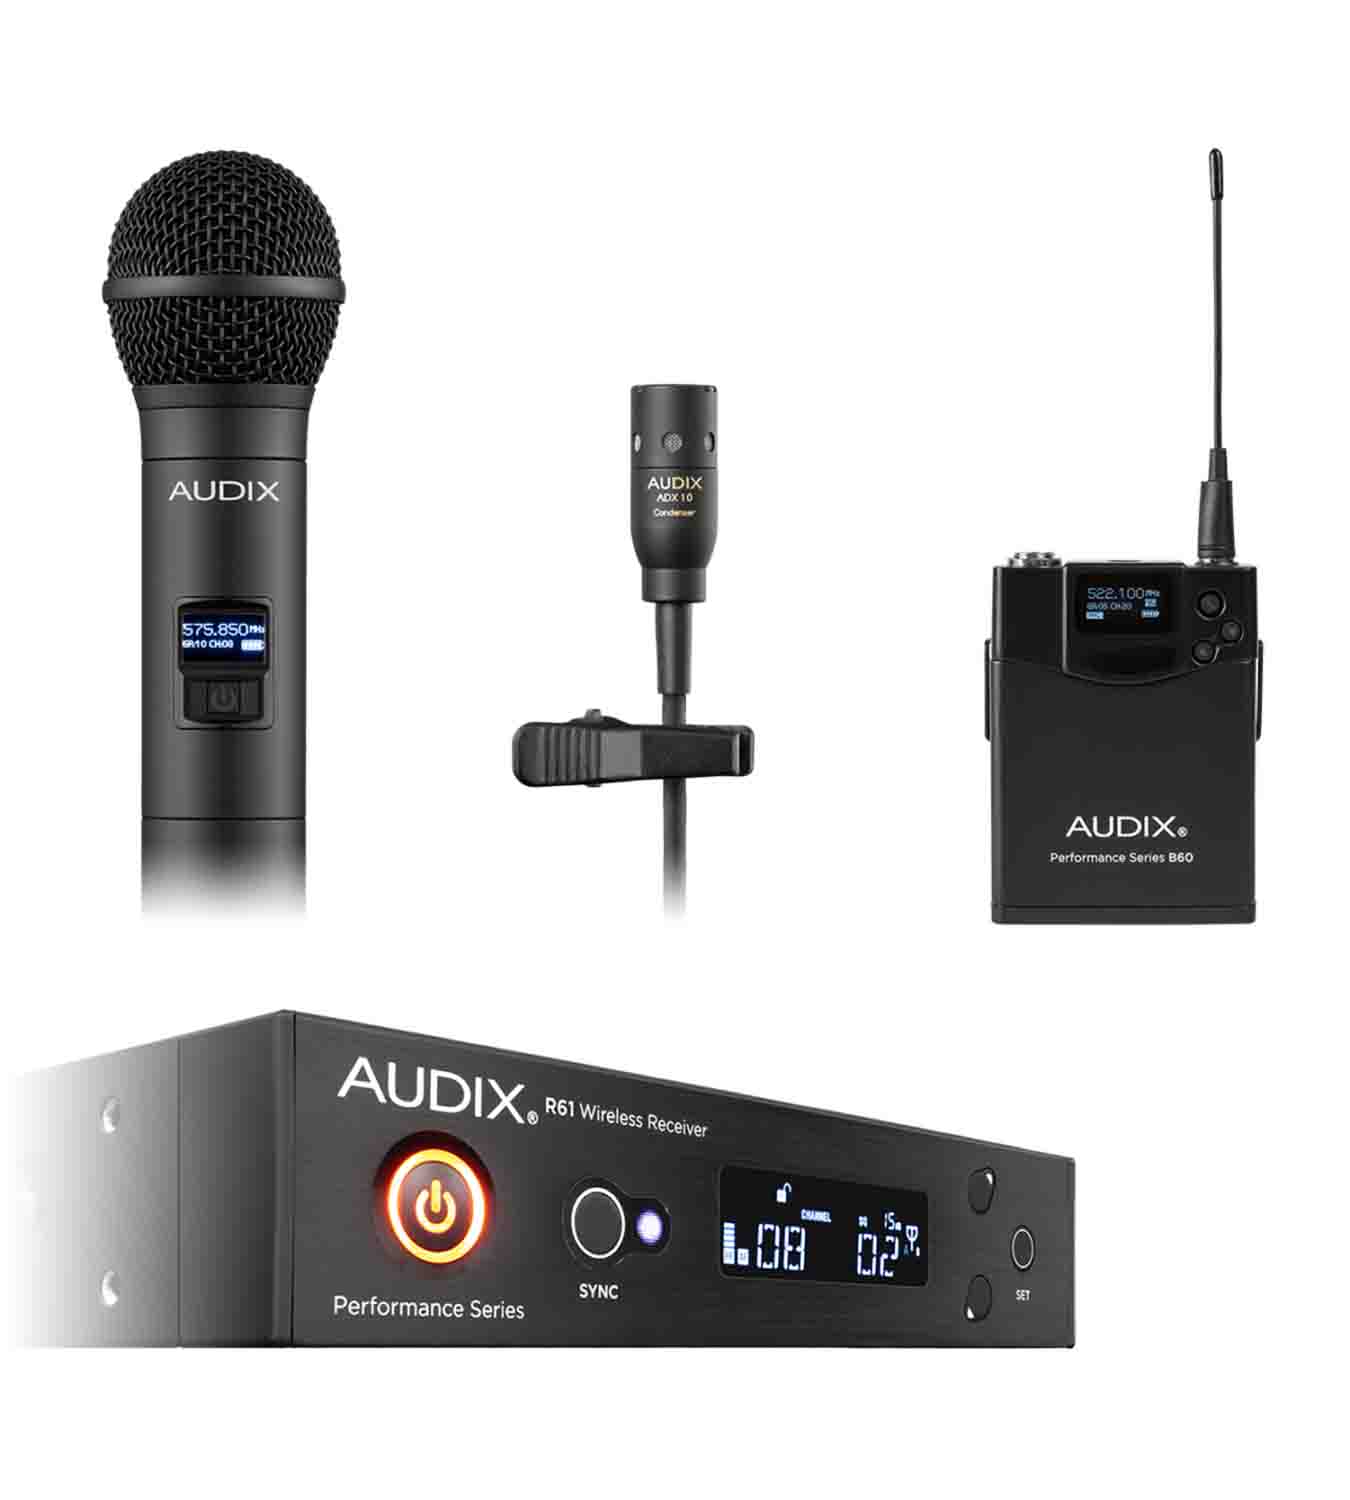 Audix AP61 OM2 L10, R61 Diversity Receiver, H60/OM2 Handheld Transmitter, And B60 Bodypack Transmitter with ADX10 Microphone - Hollywood DJ